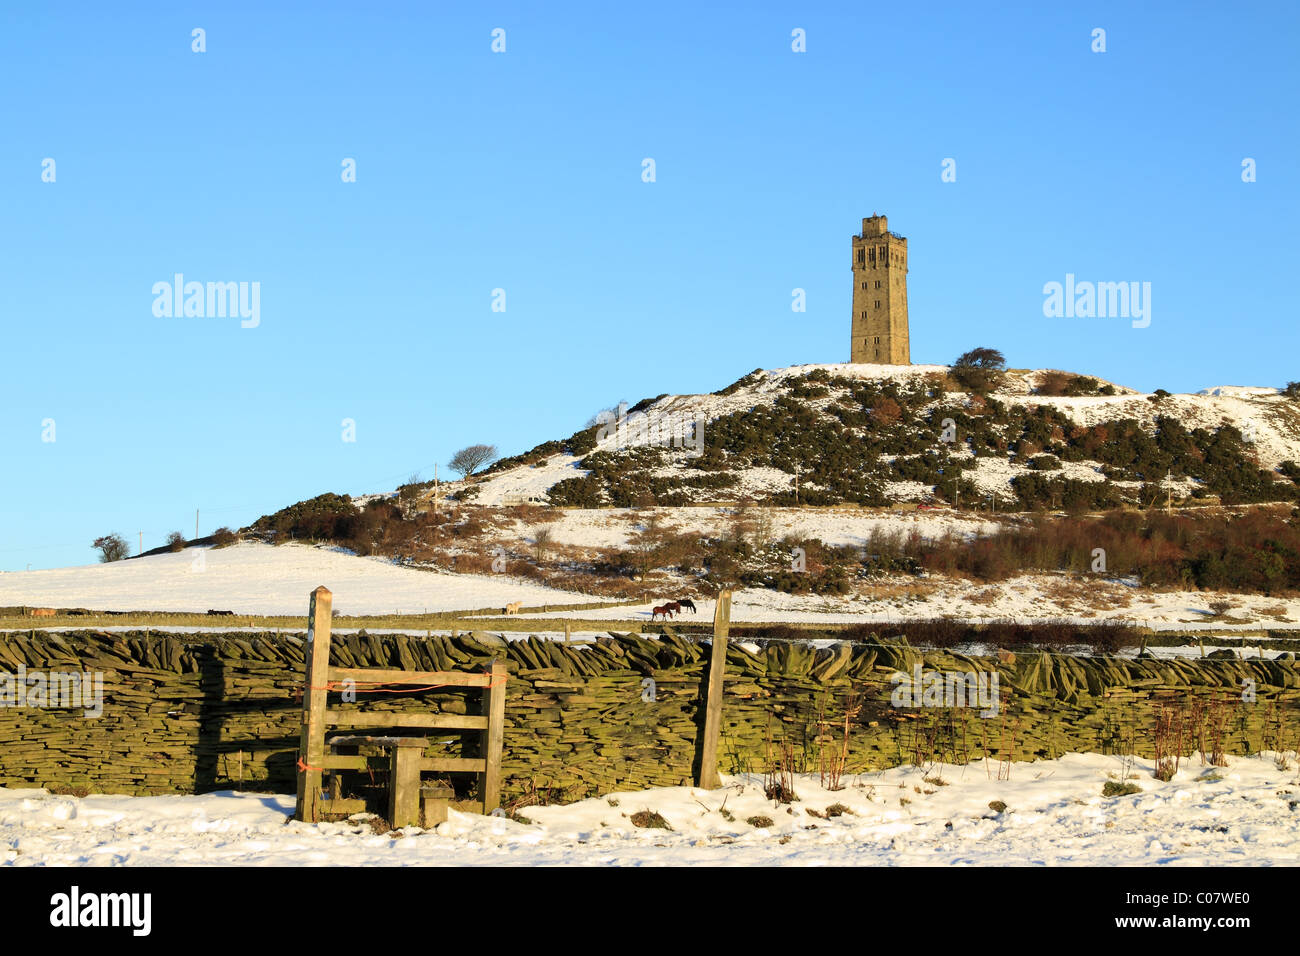 A snow covered wintertime view of the Jubilee Tower on Castle Hill, the well known landmark in Huddersfield, West Yorkshire Stock Photo